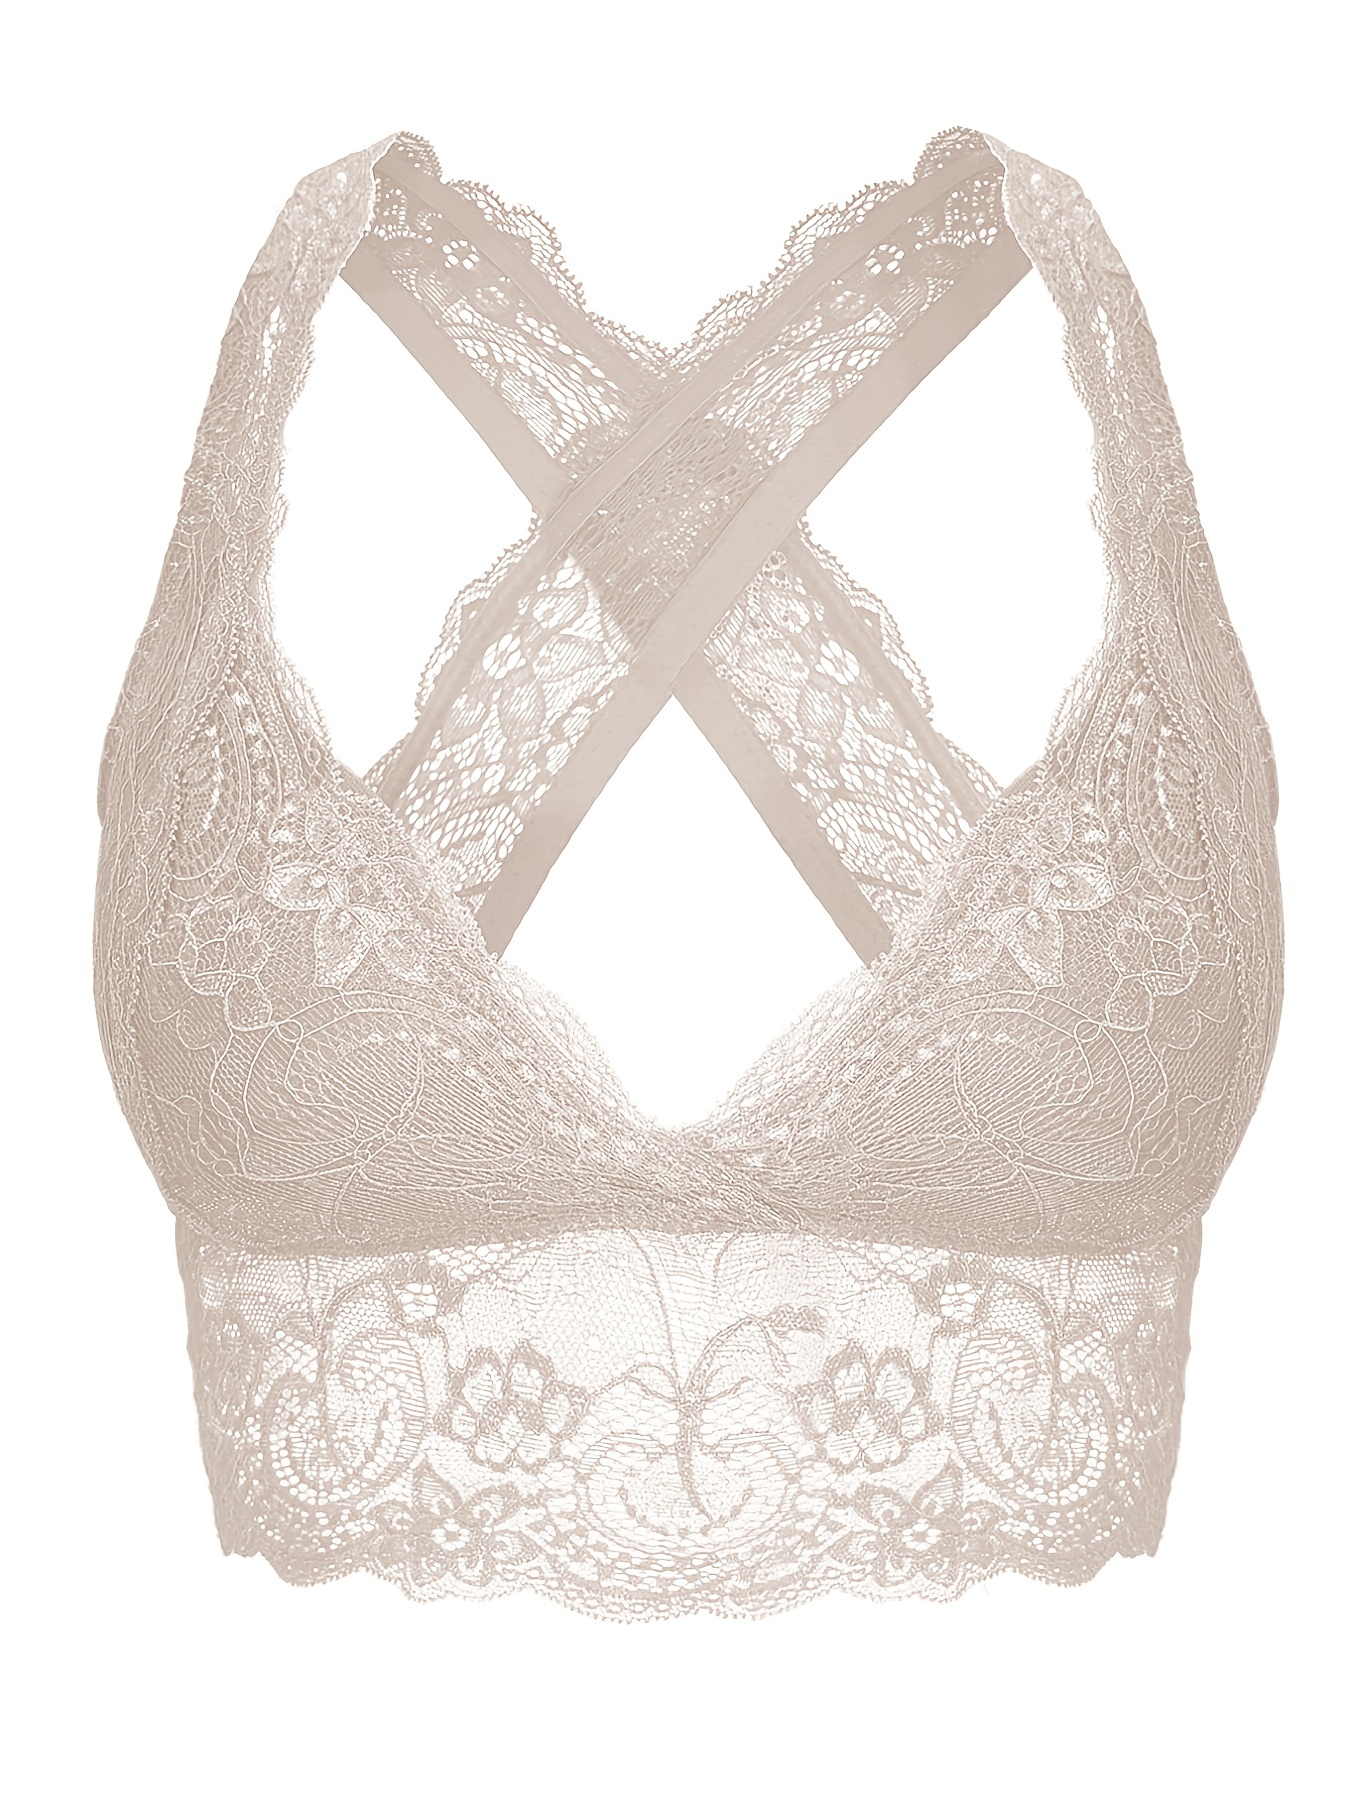 JOJOANS Floral Lace Halter Bra Bralette Top Hook and Eye Closure in The  Back Unpadded Wirefree Lace Bra Nude